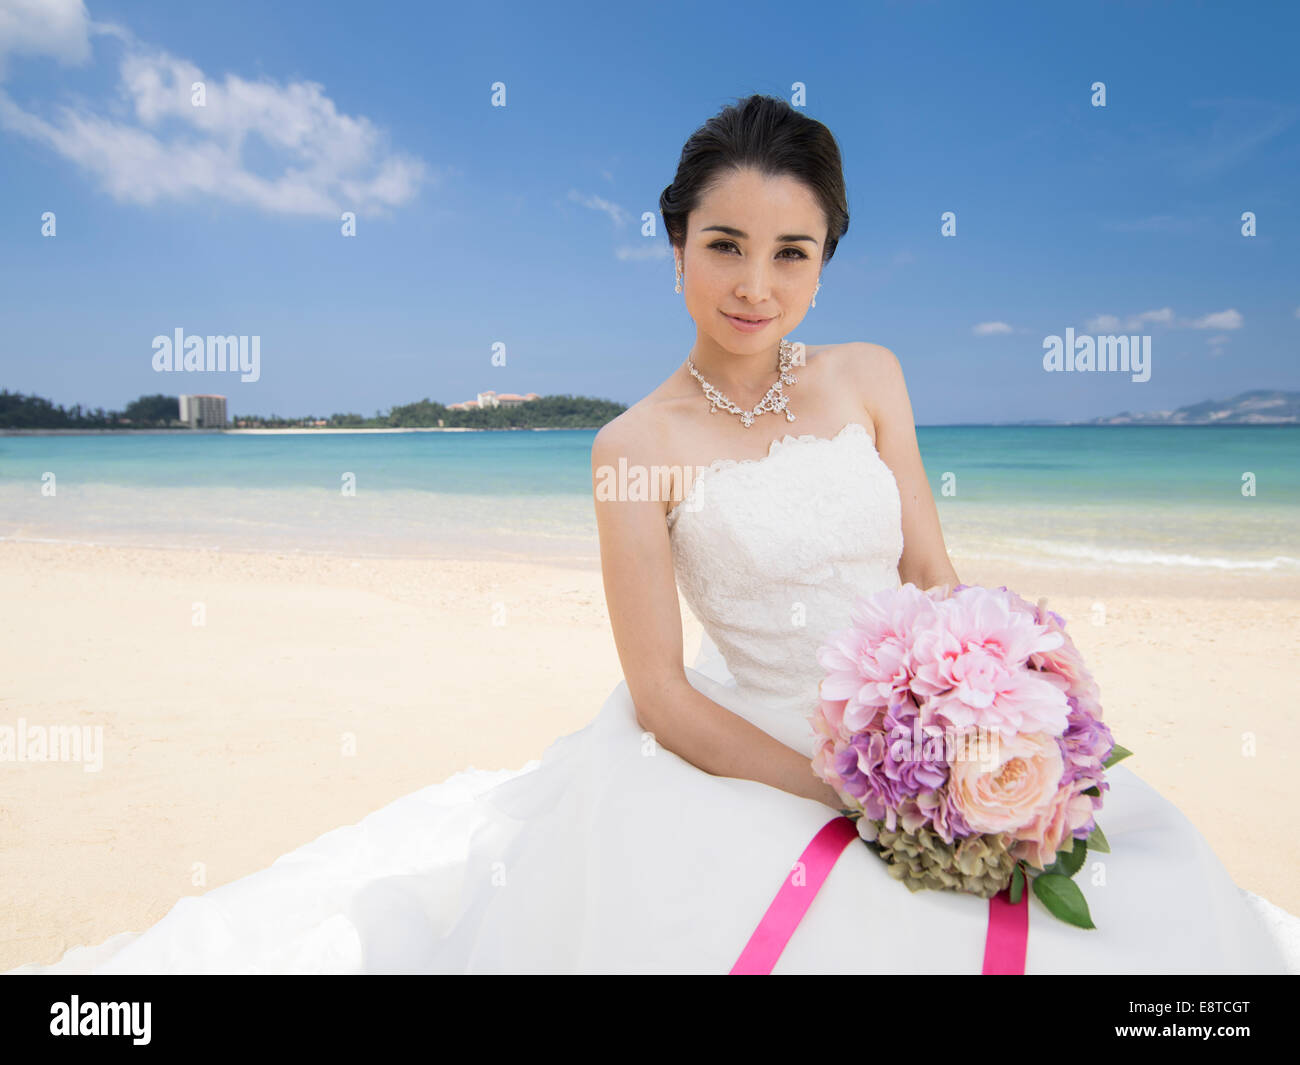 Mixed race, Asian / American bride in white wedding dress at destination beach wedding in Okinawa, Japan Stock Photo